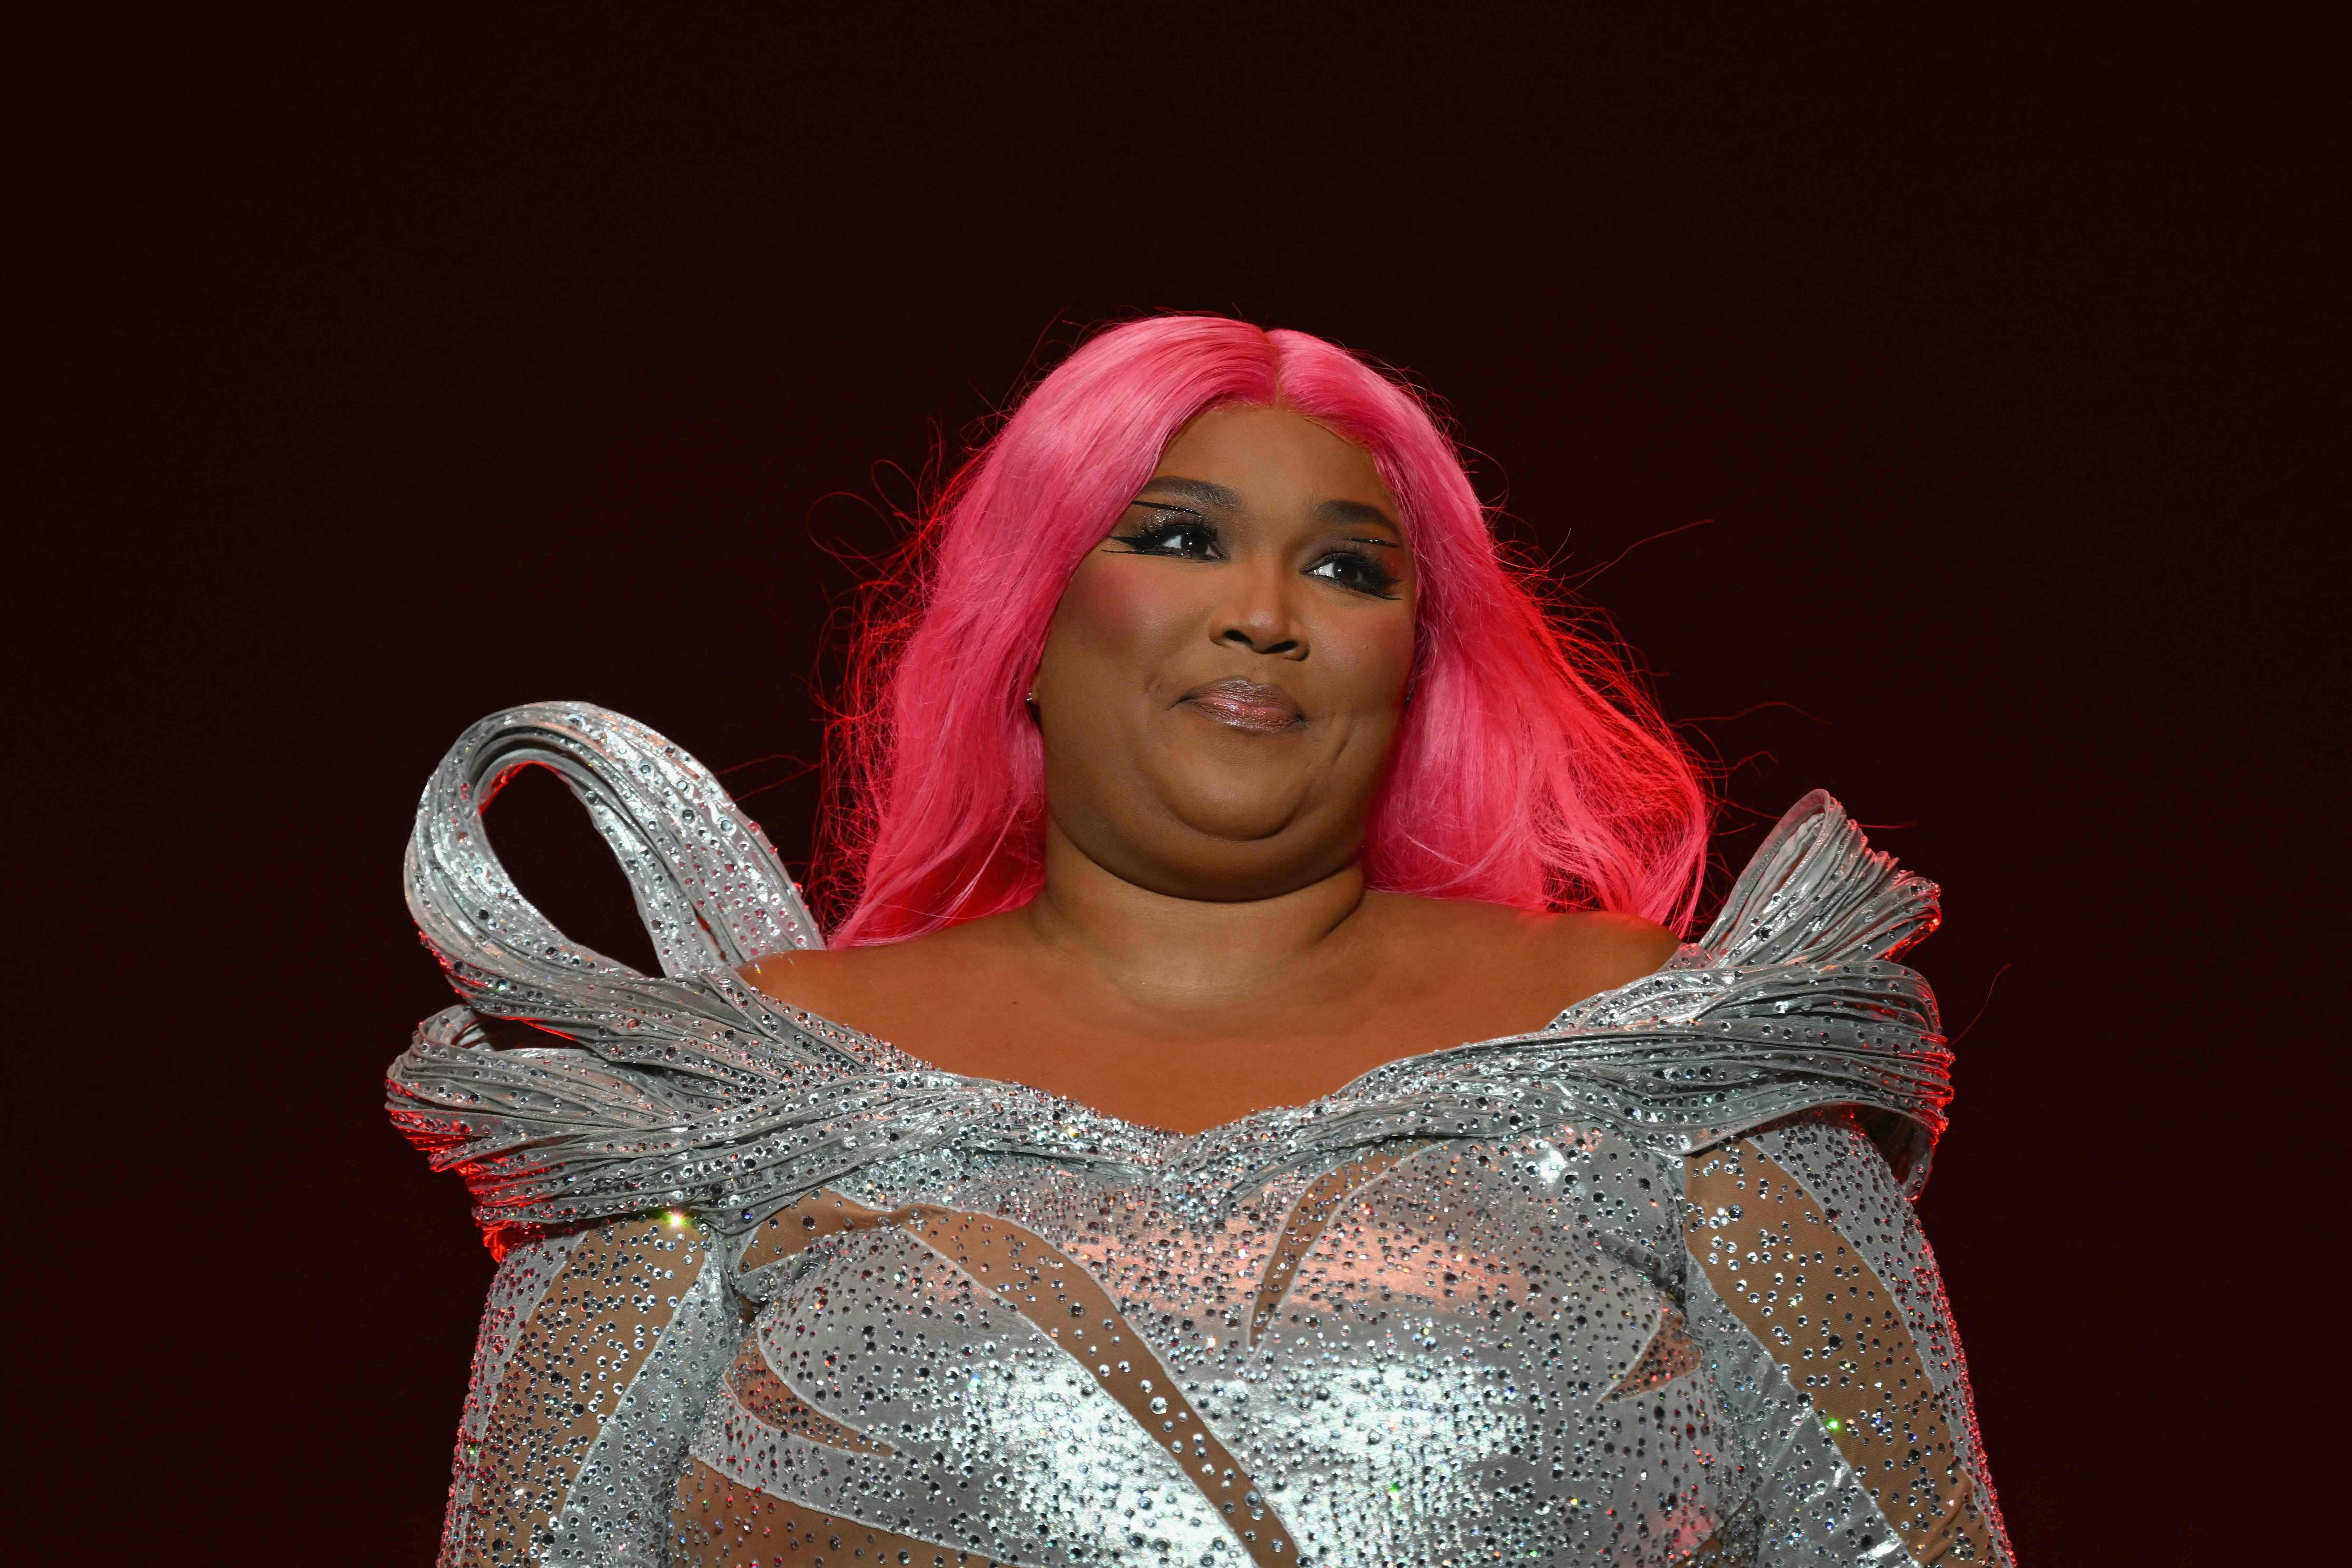 US singer Lizzo performs during the 2023 Governors Ball Music Festival at Flushing Meadows Corona Park, New York City, on June 9 2023. (Photo by ANGELA WEISS / AFP)